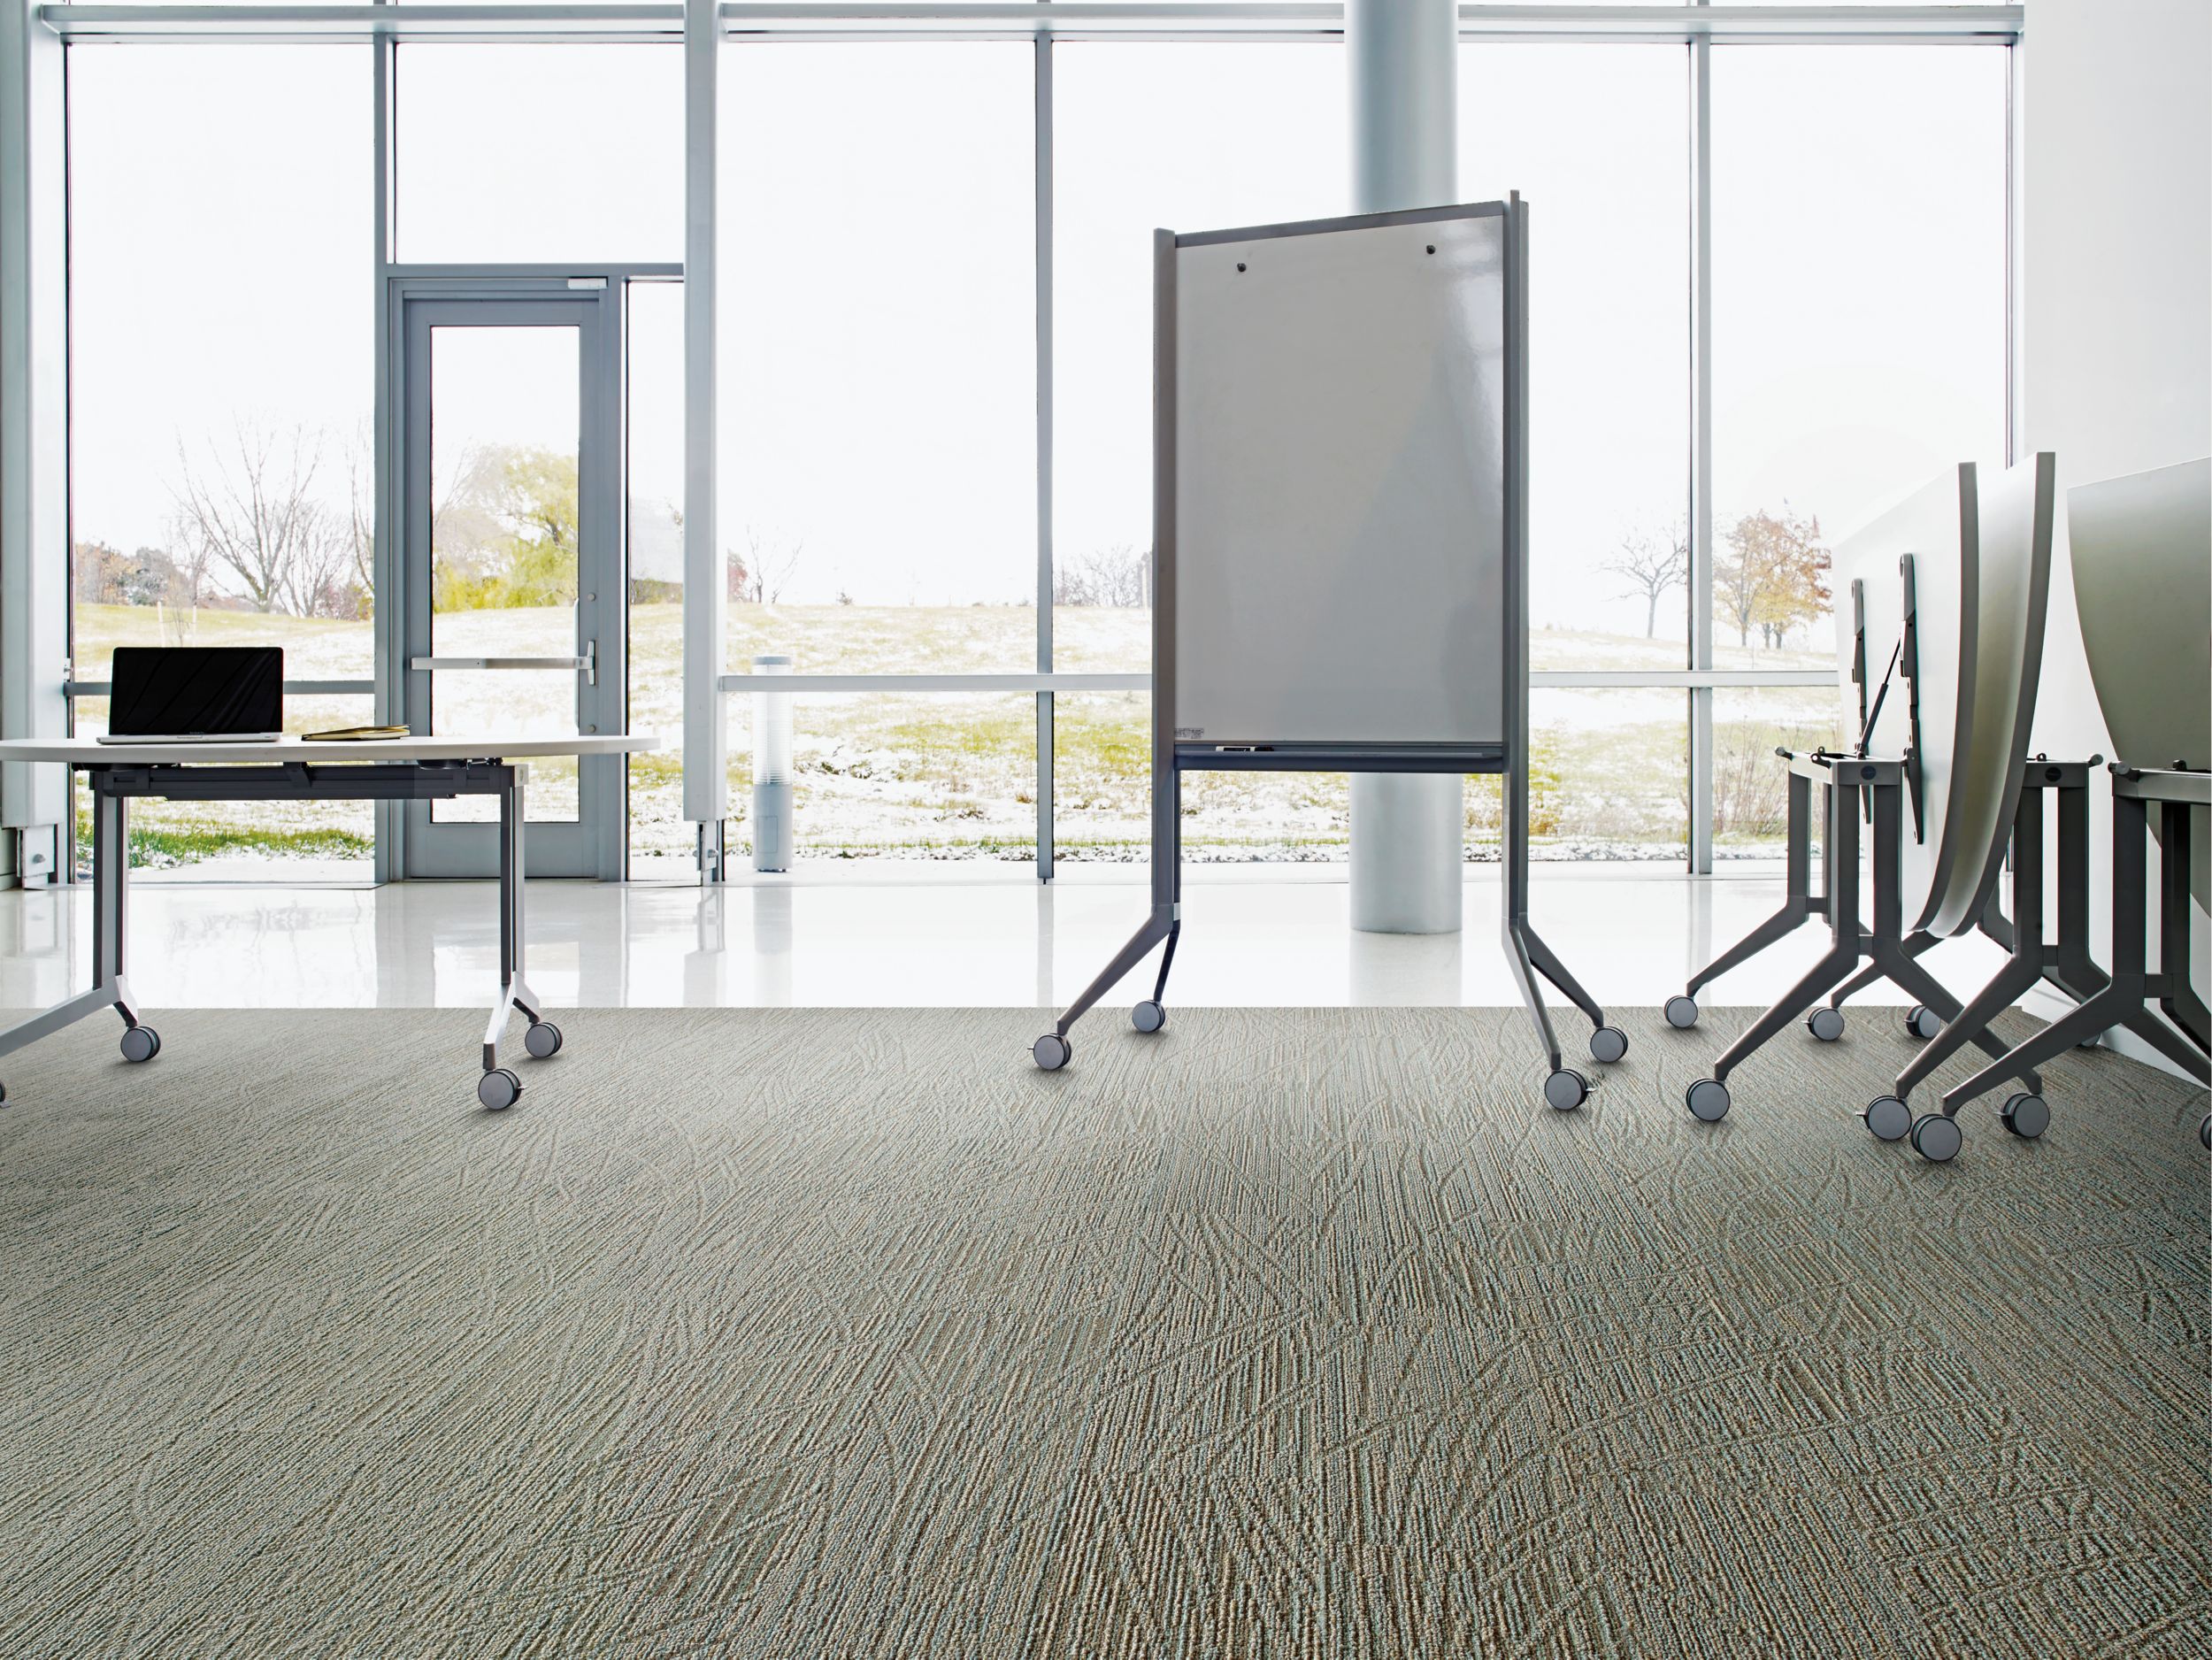 Interface WE152 and WE154 plank carpet tile in meeting area with white board imagen número 1